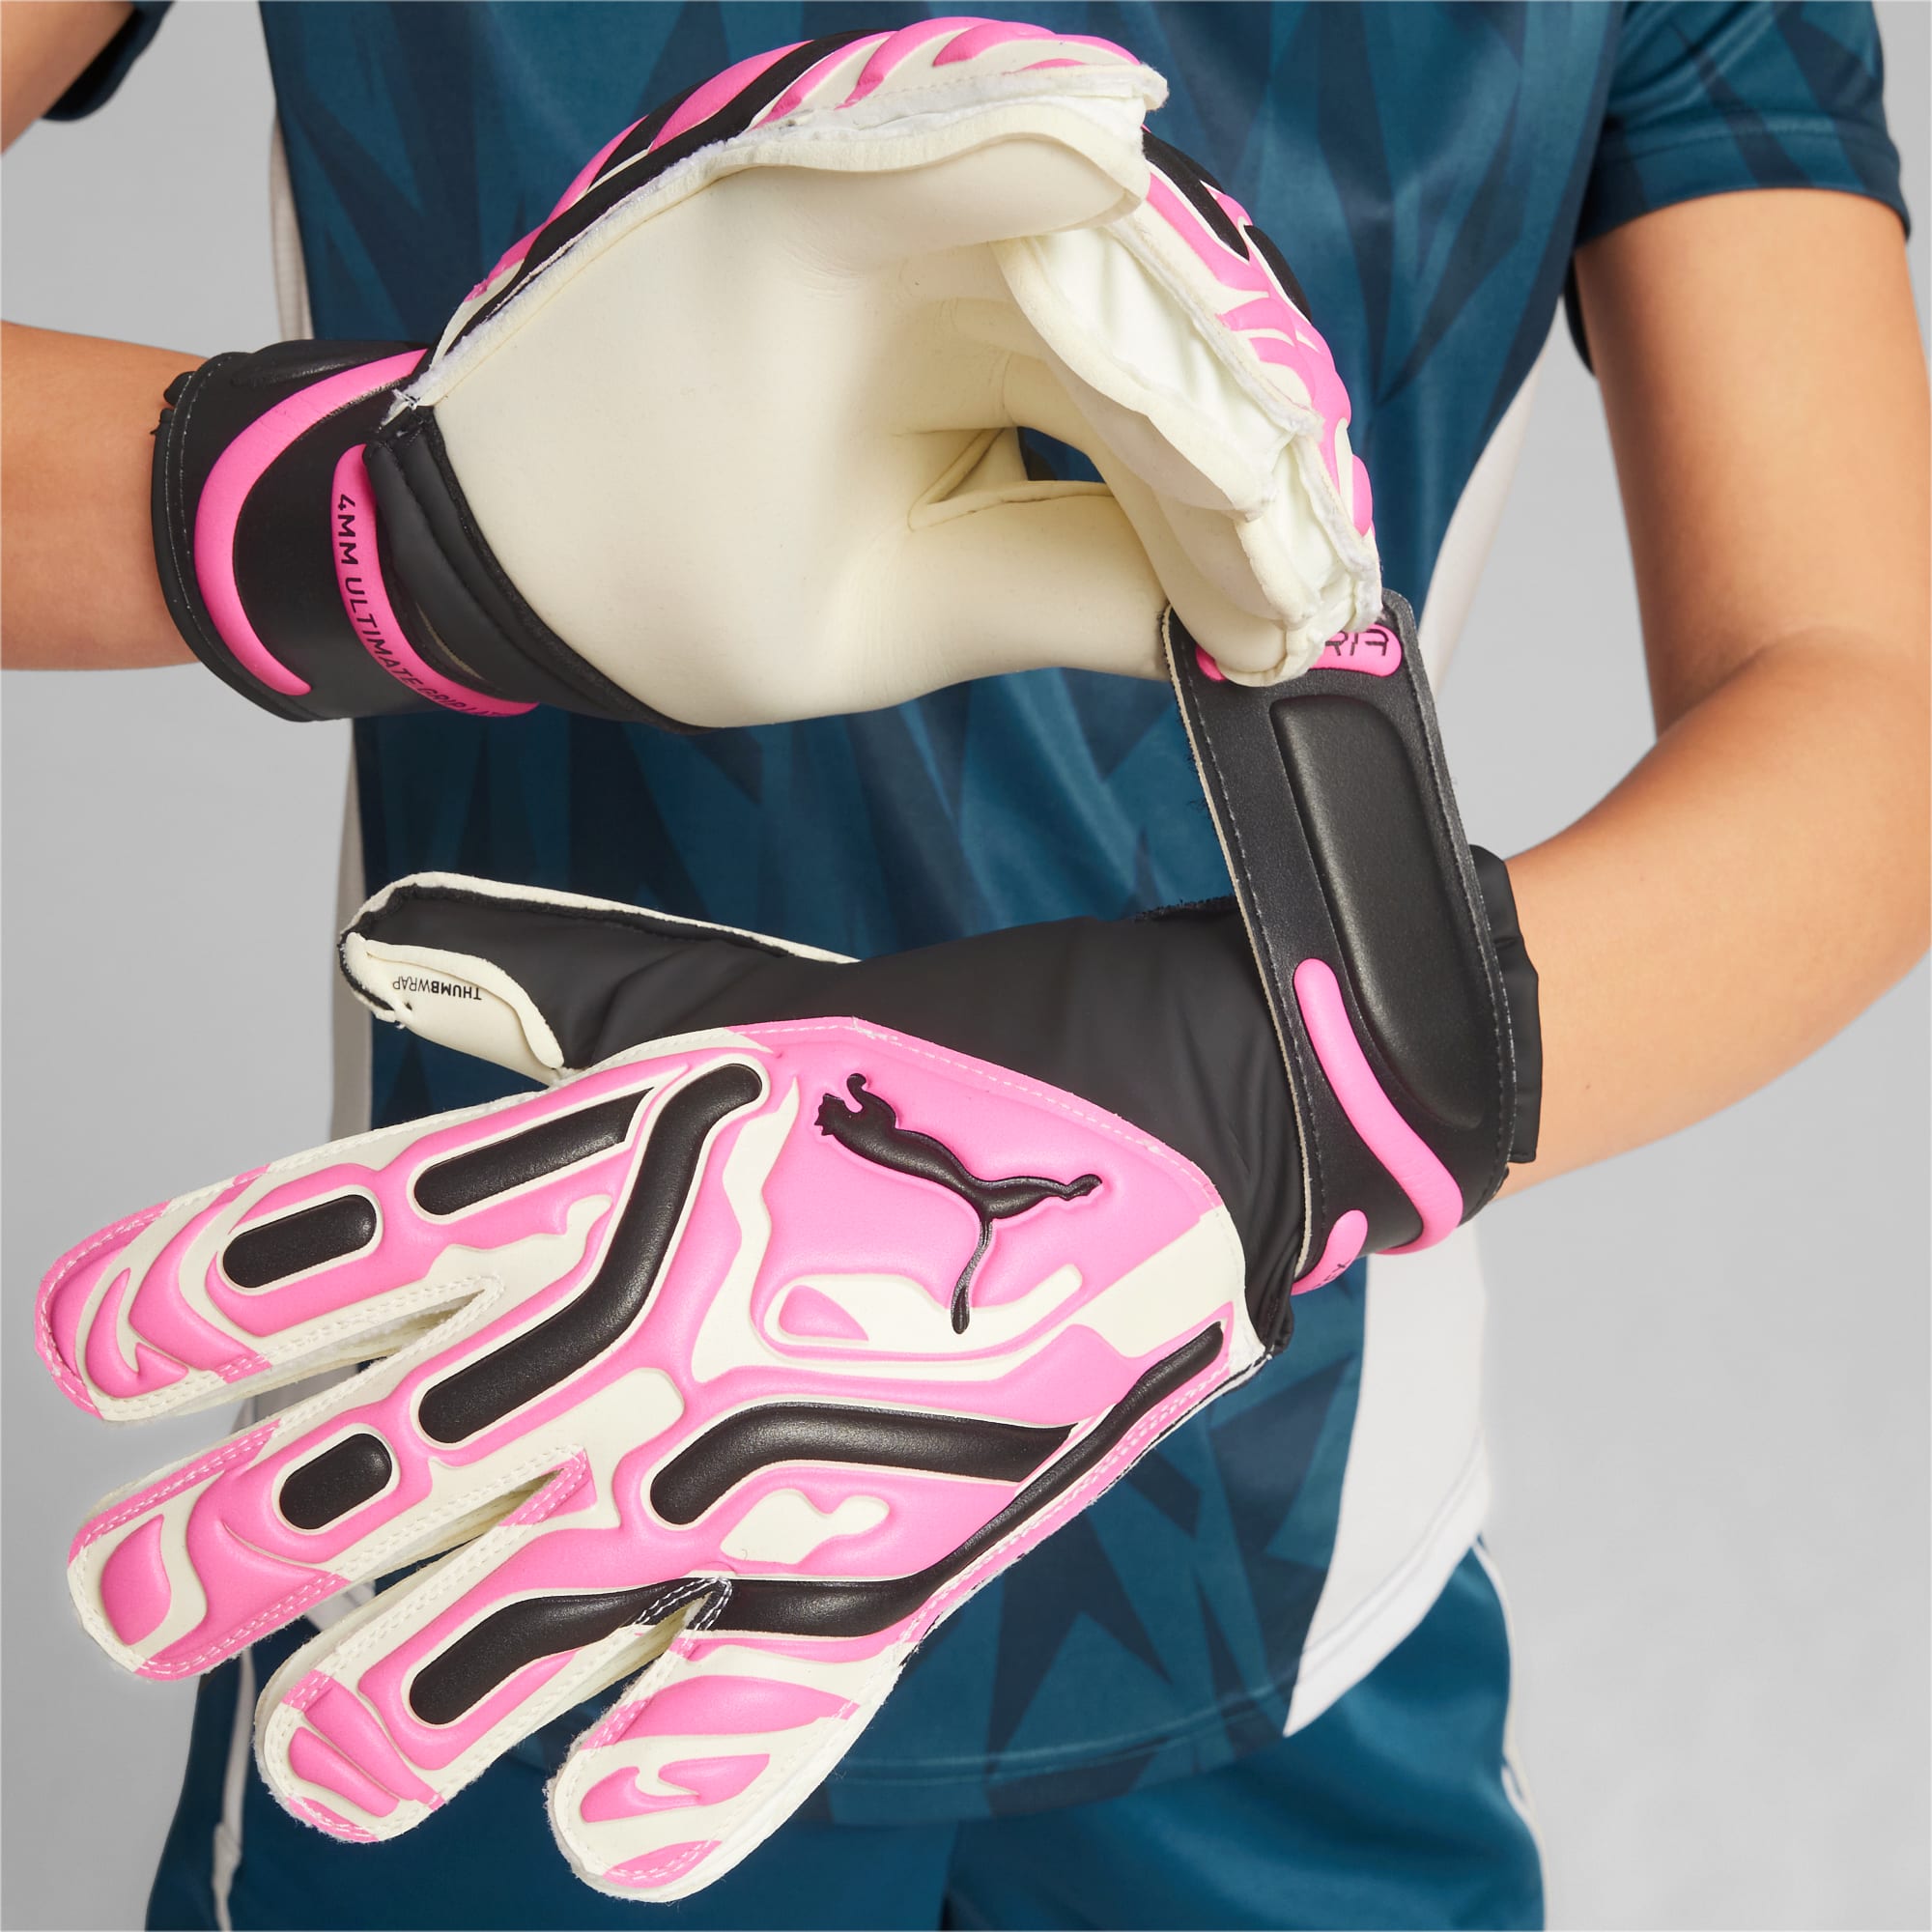 PUMA Ultra Match Protect Youth Goalkeeper Gloves, Poison Pink/White/Black, Size 4, Accessories